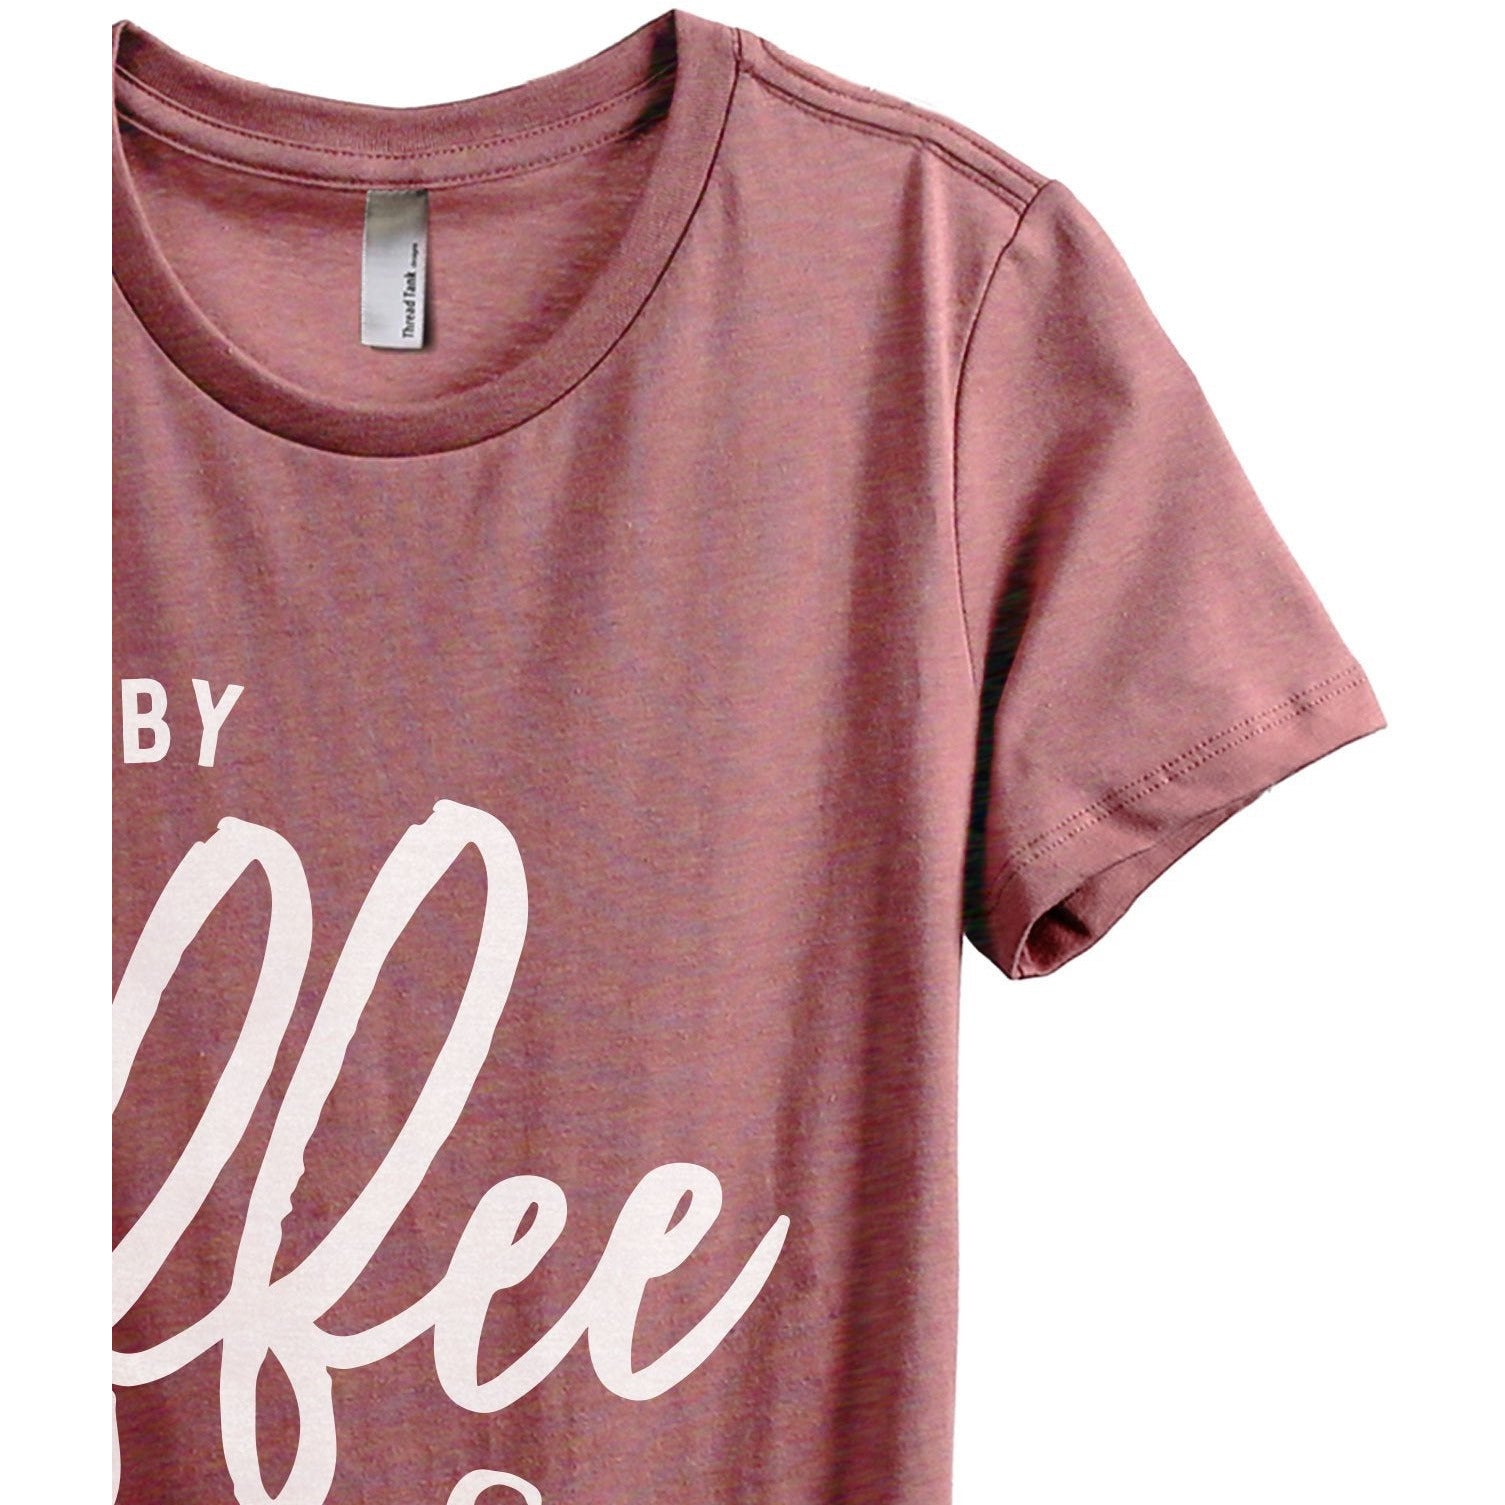 Fueled By Coffee And Tears Of My Enemies Women's Relaxed Crewneck T-Shirt Top Tee Heather Rouge Zoom Details
